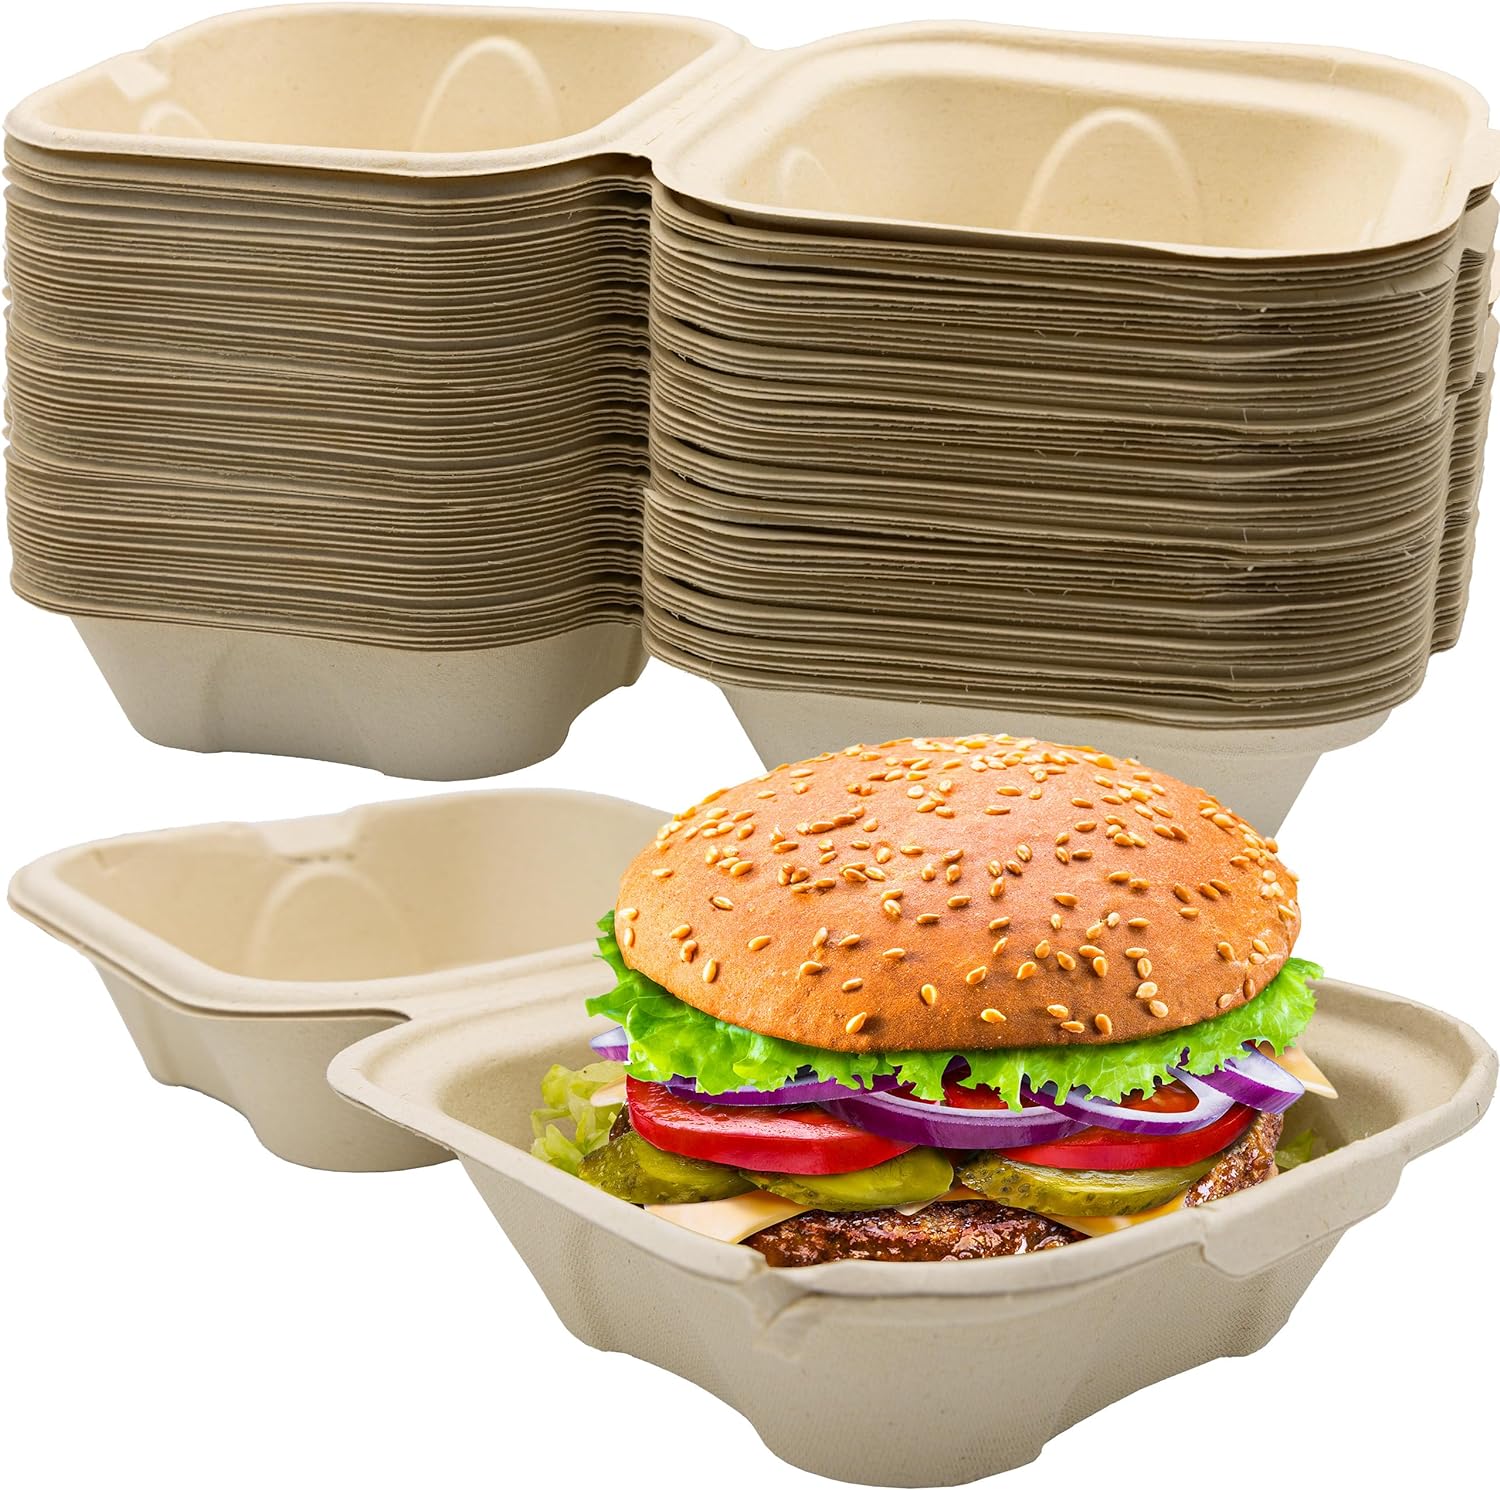  Food Containers